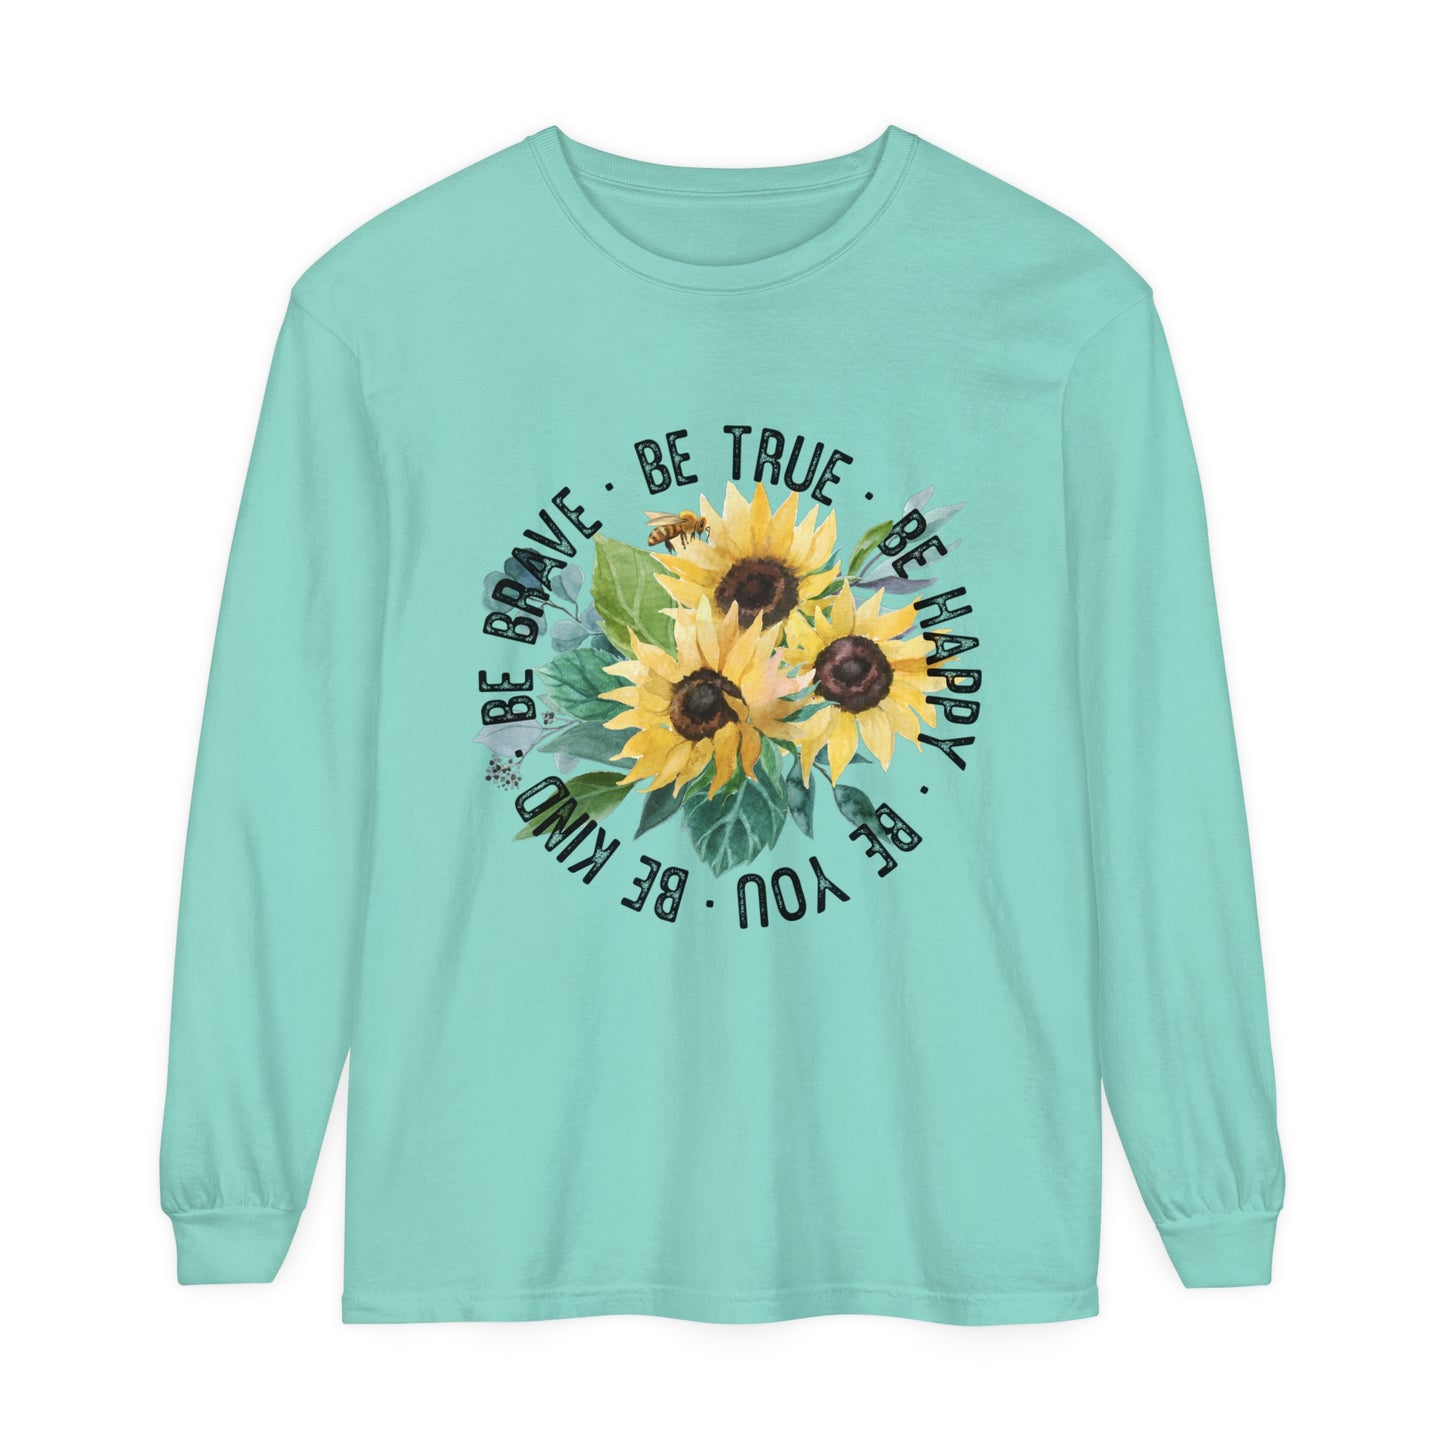 Be Kind, Be Brave, Be True, Be You, Be Happy Women's Loose Long Sleeve T-Shirt